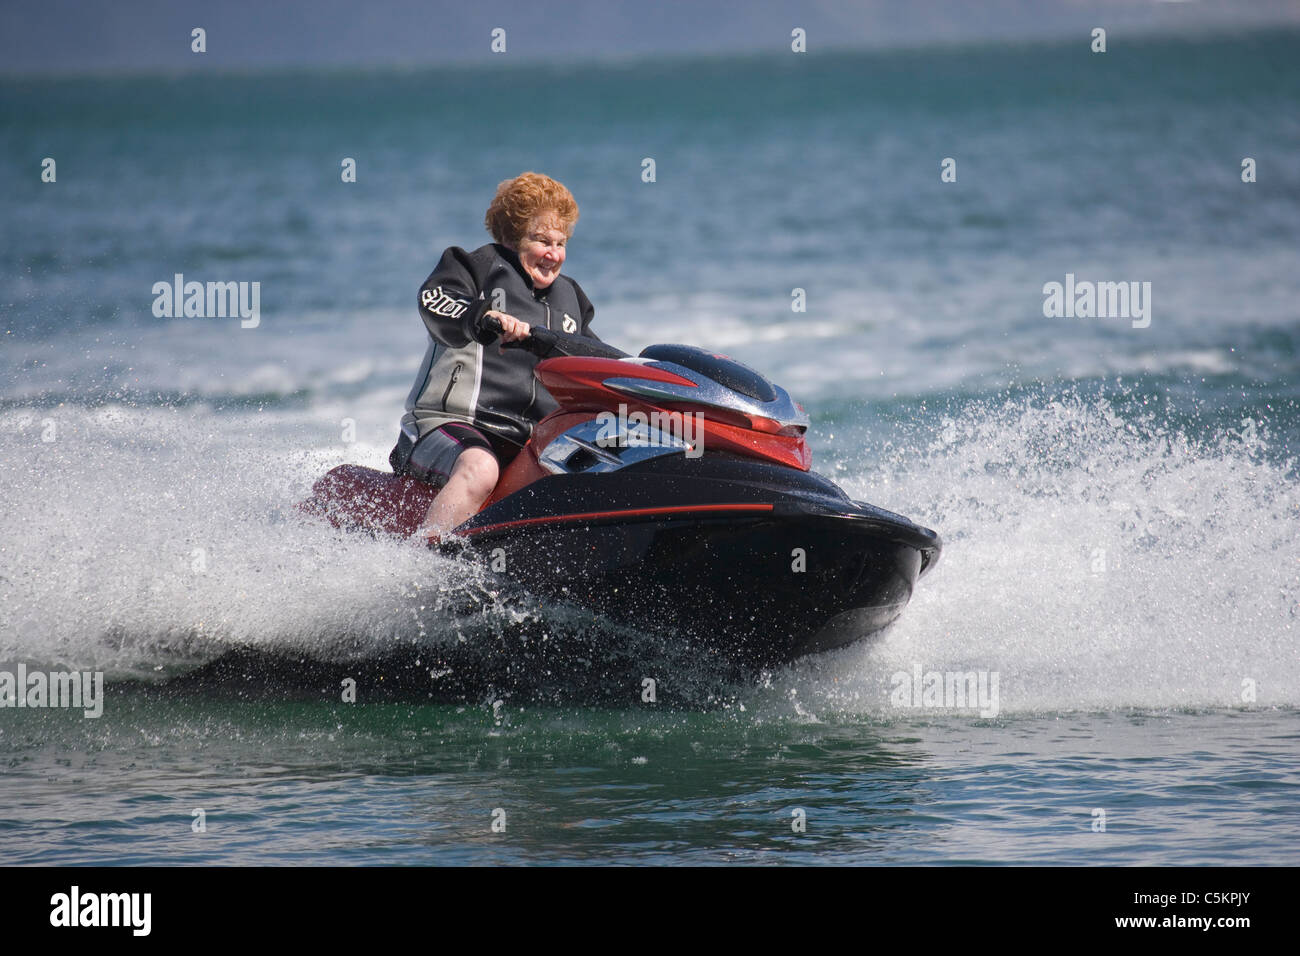 jet ski, jet skis, jet skiing, jetski, jetskiing, fun, speed, fast, water, human, person, thrill, excitement, adrenalin, Stock Photo